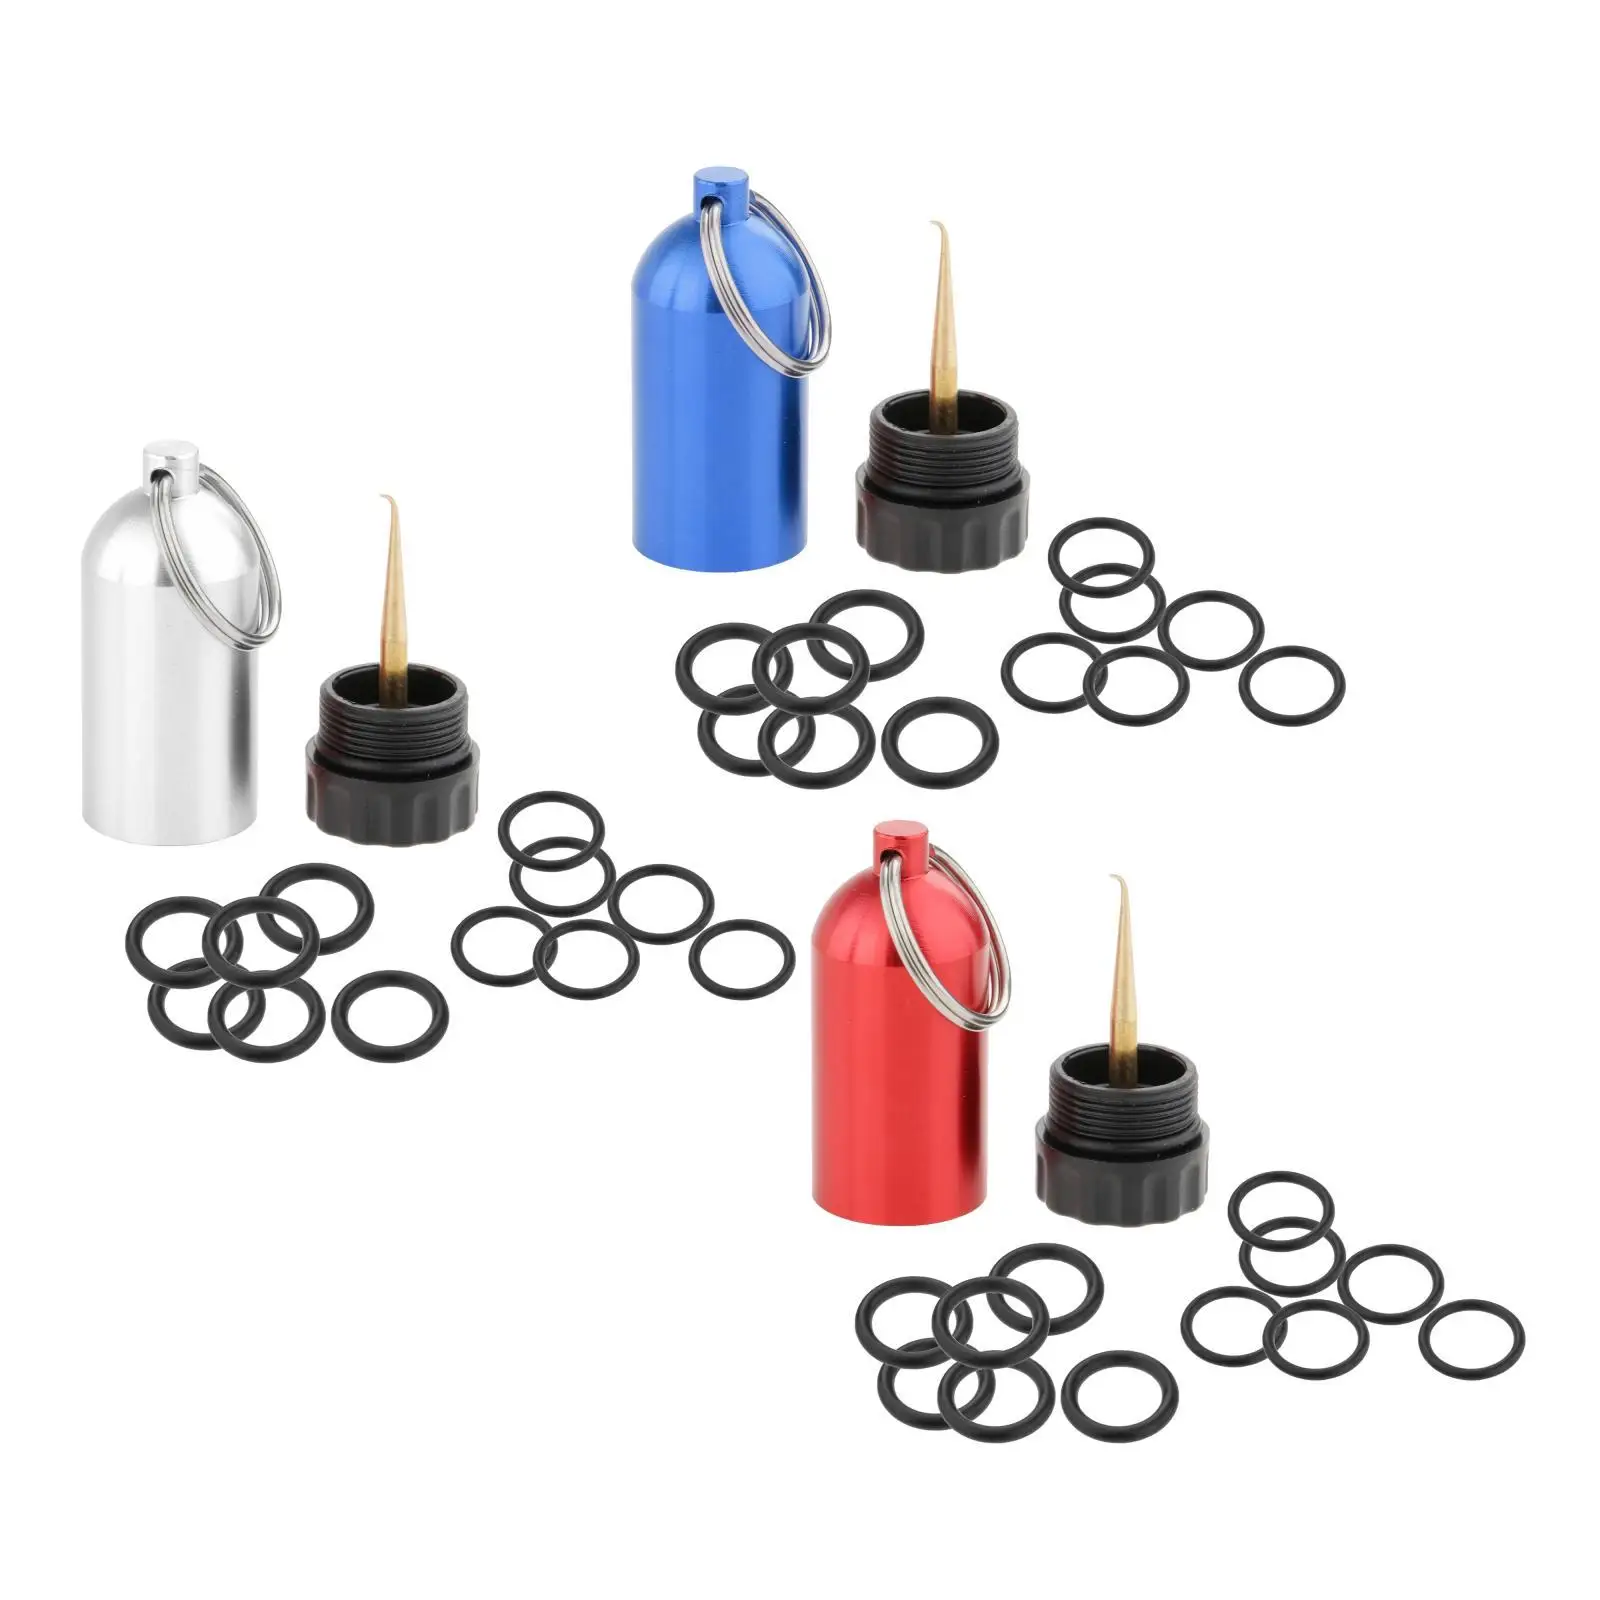 Scuba Diving  Key Ring with O-Rings Diving Bottle Keychain Key Chain Repair Kit ylinder Valve Sealing Ring for Scuba